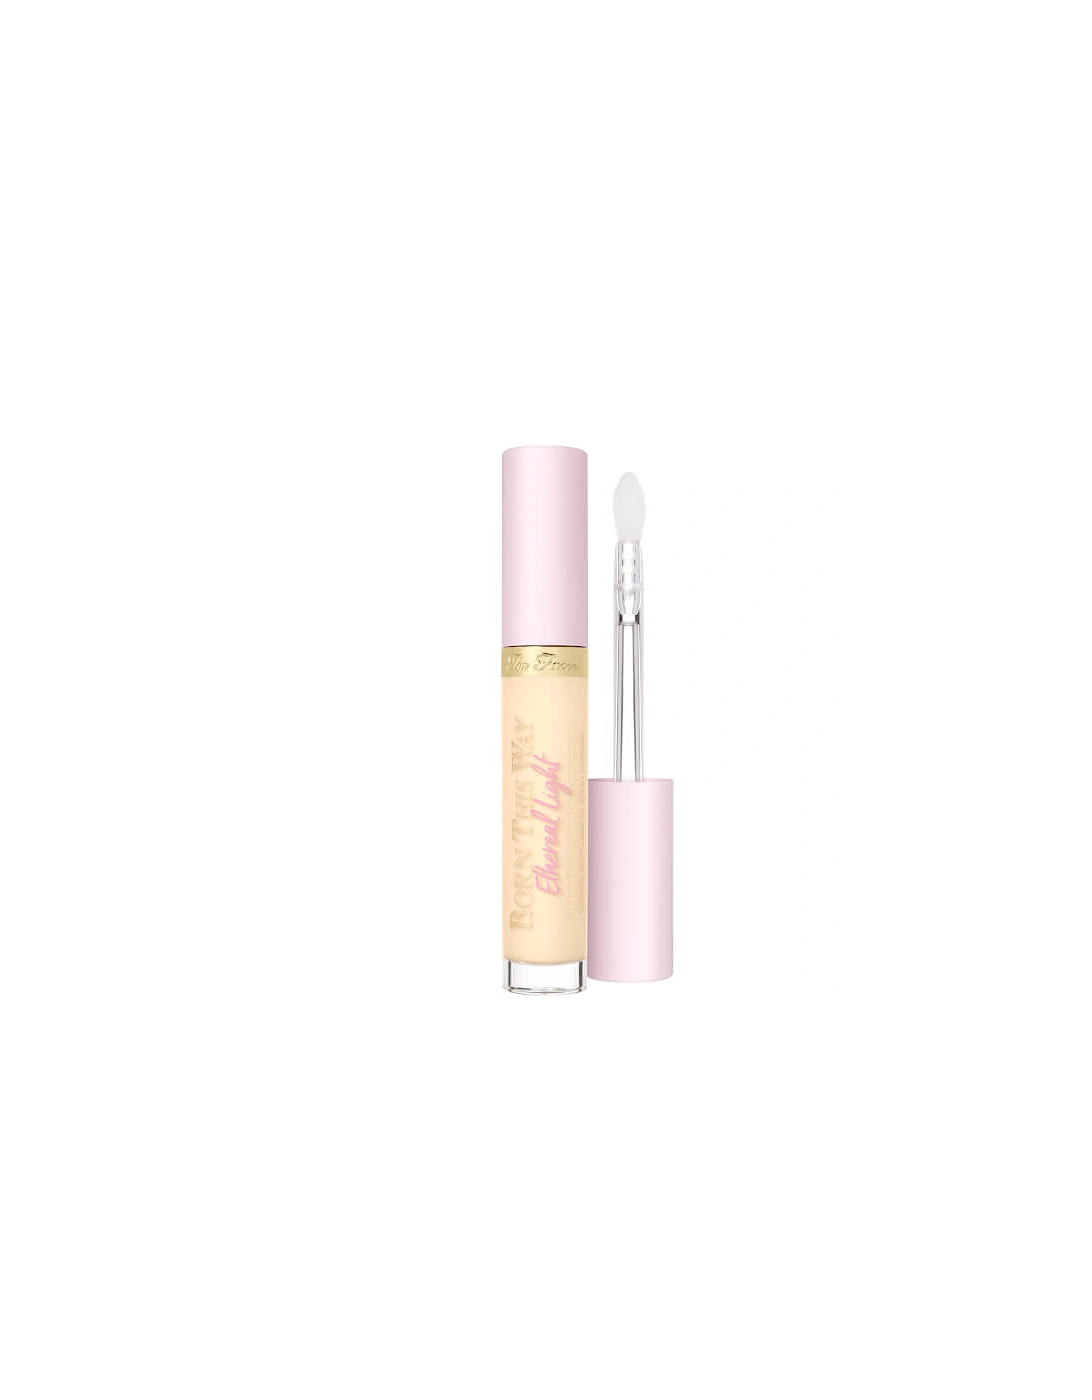 Born This Way Ethereal Light Illuminating Smoothing Concealer - Vanilla Wafer, 2 of 1